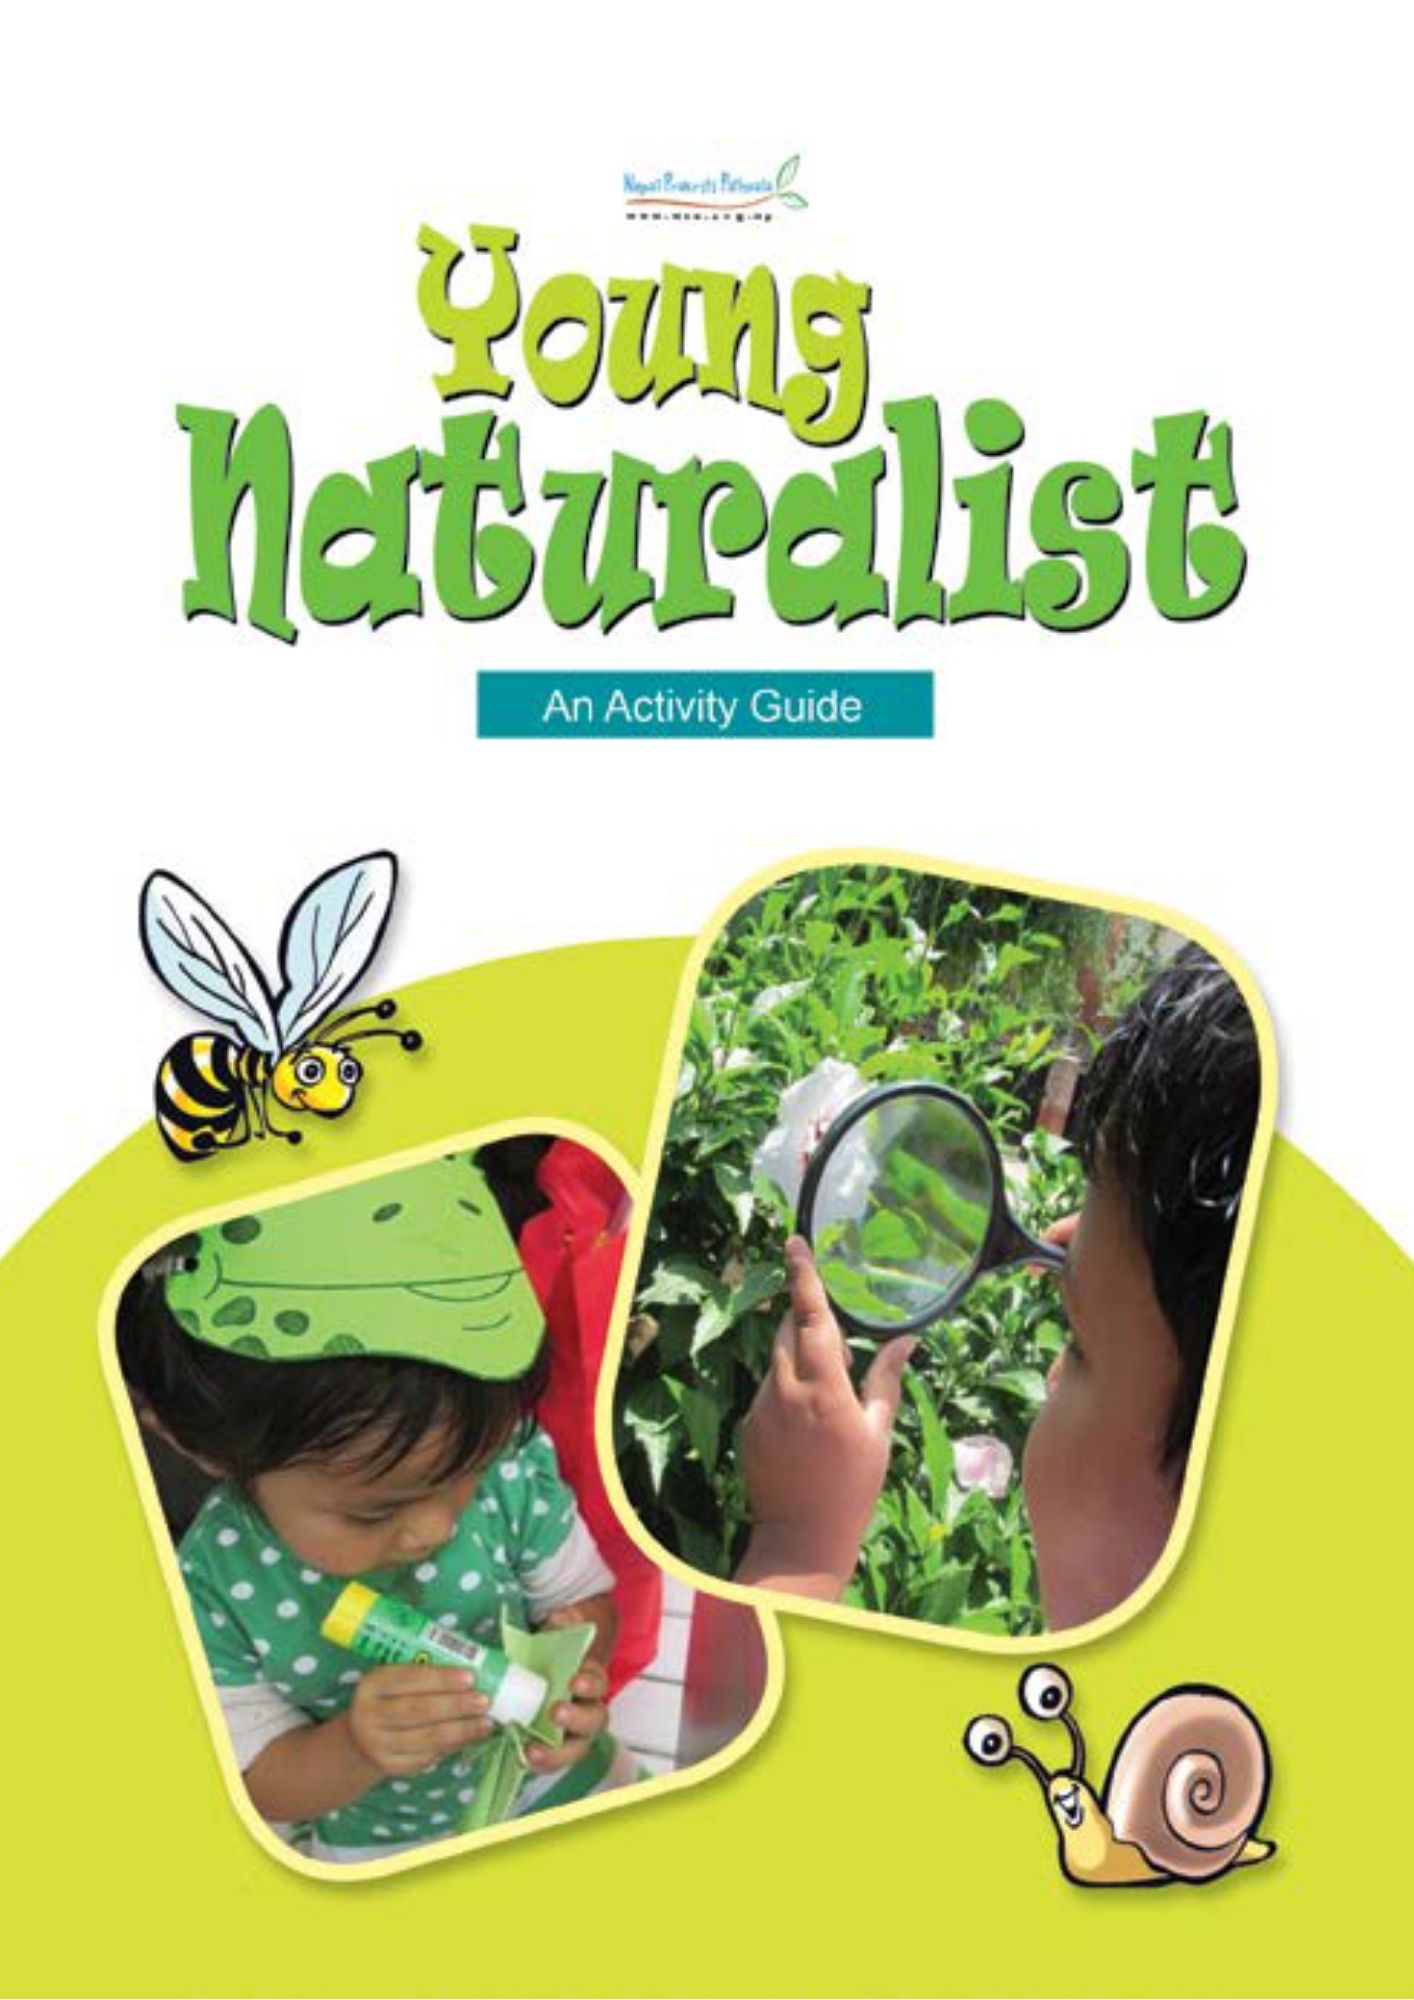 Young Naturalist